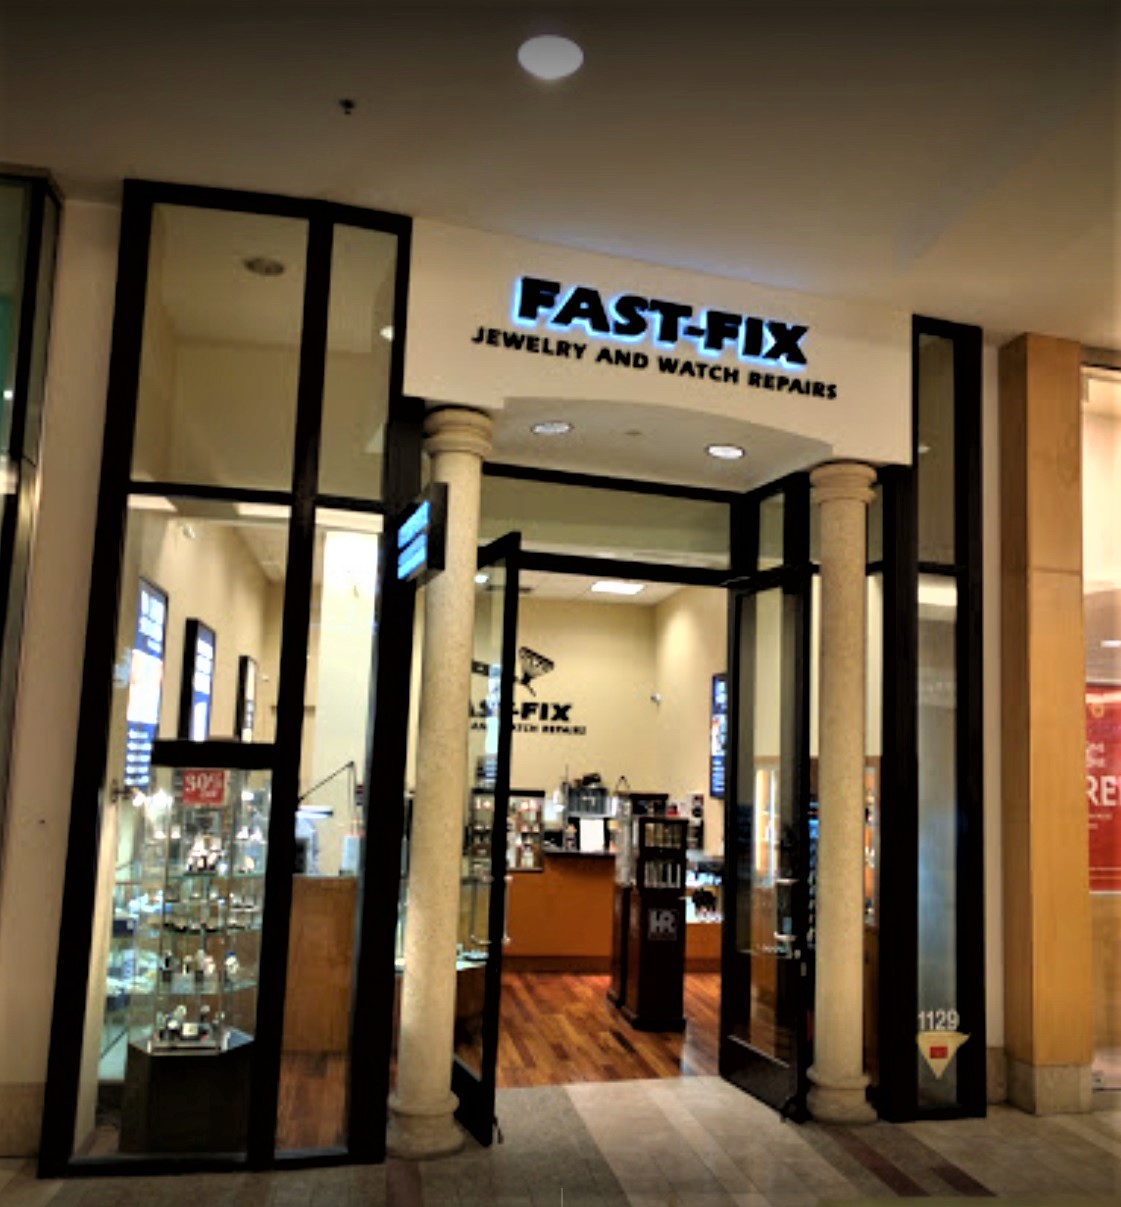 Picture of Fast-Fix storefront at South Center Mall. Two pillars with Fast-Fix Jewelry and watch Repairs logo on top. Windows on the sides that let the customer see through the store.